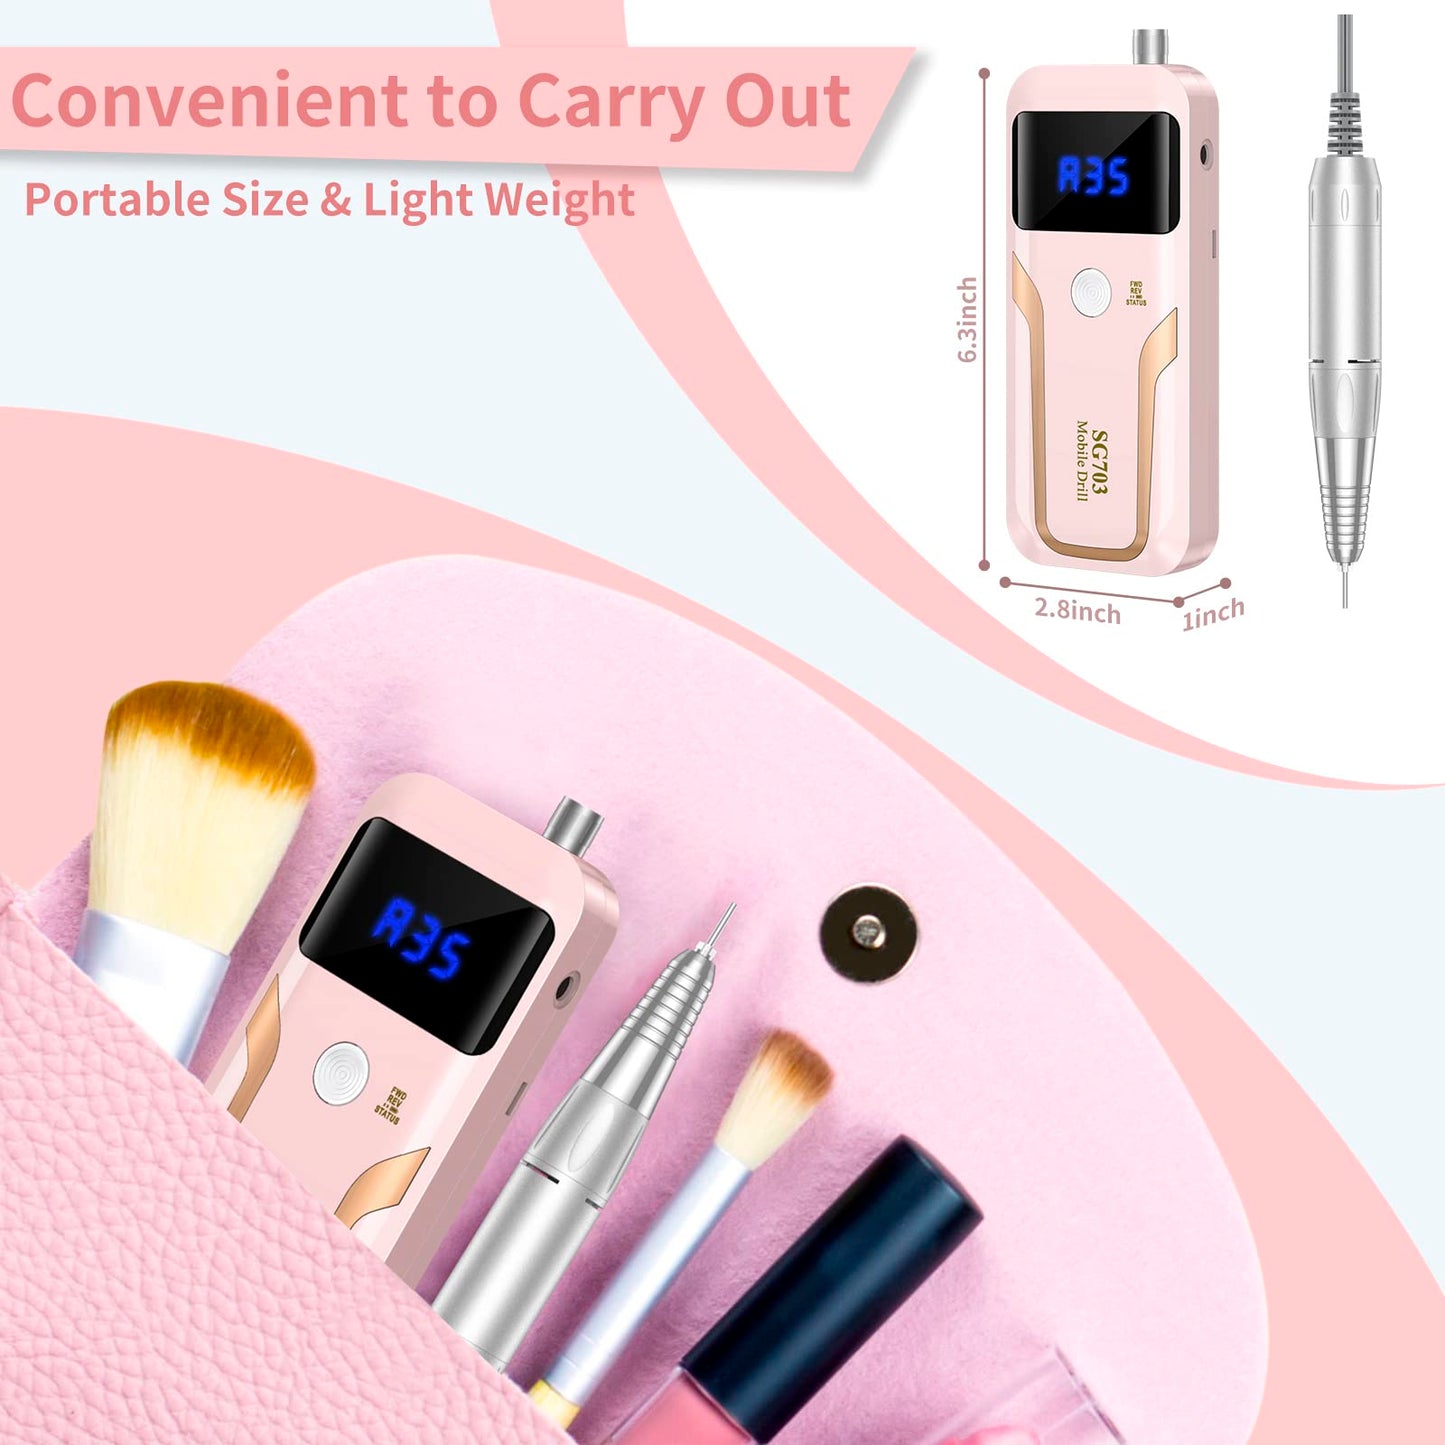 Portable Nail Drill Professional 35000 RPM, Rechargeable Electric Nail File Machine E File for Acrylic Nails Gel Polishing Removing, Cordless Efile with Bits Kit for Manicure Salon Home, Pink